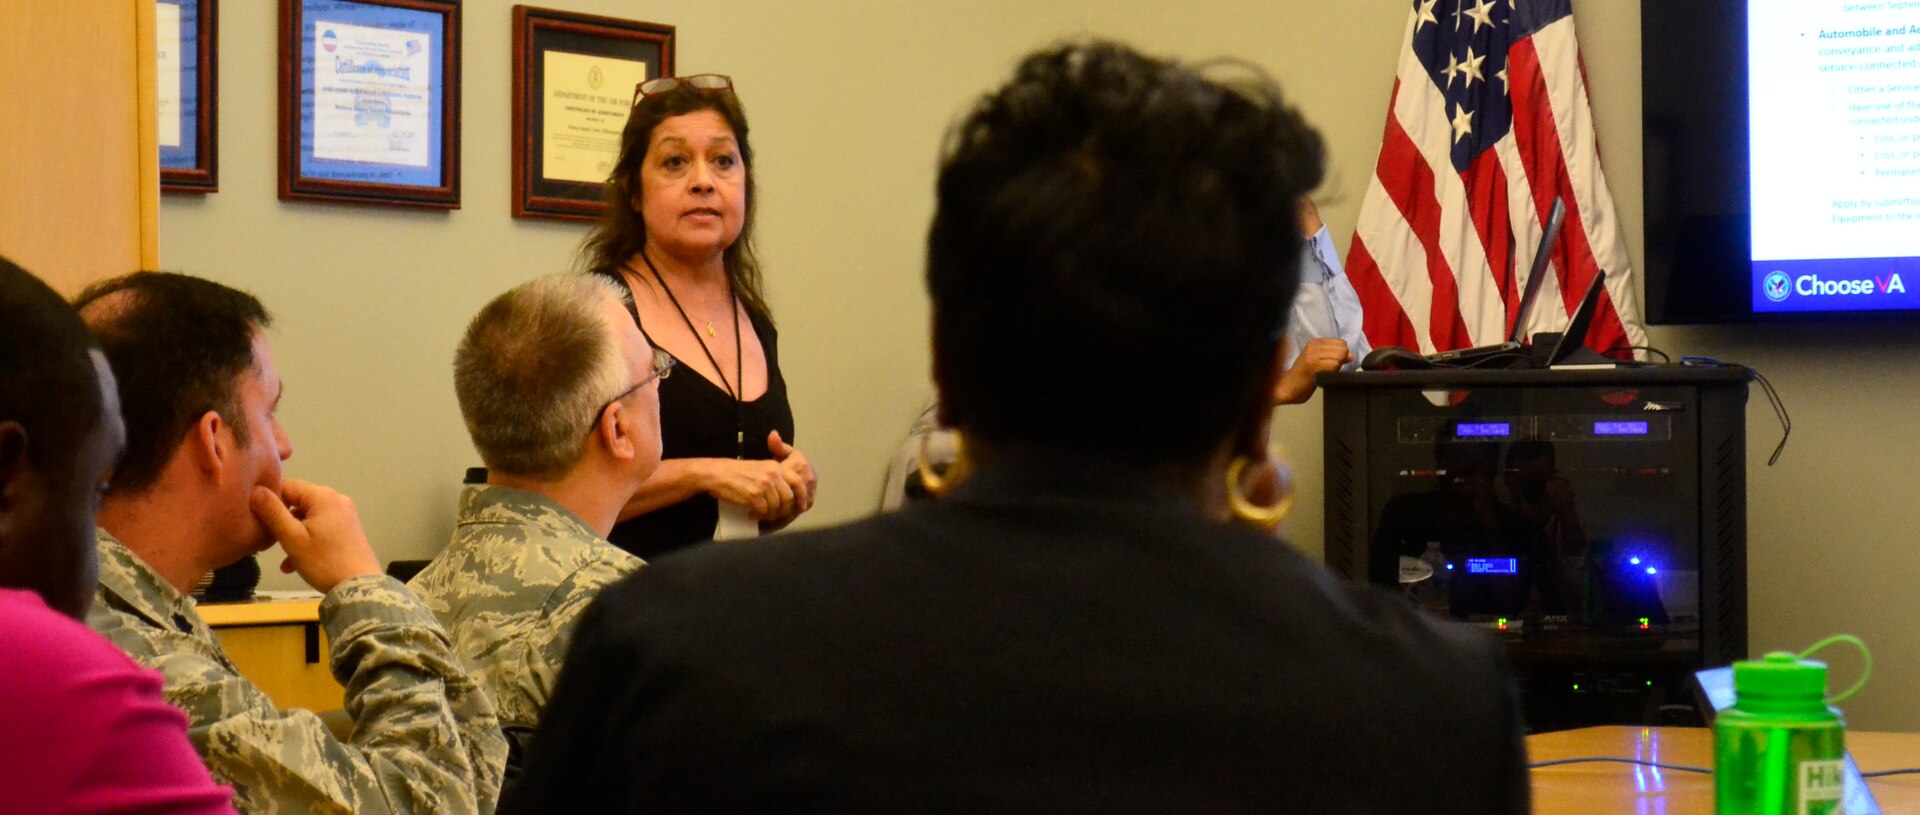 Maria Arroyo, from the Philadelphia Veterans Affairs Regional Office and Insurance Center, left center, briefs benefits information to Medical supply chain military and veteran employees at DLA Troop Support in Philadelphia, July 18, 2018.